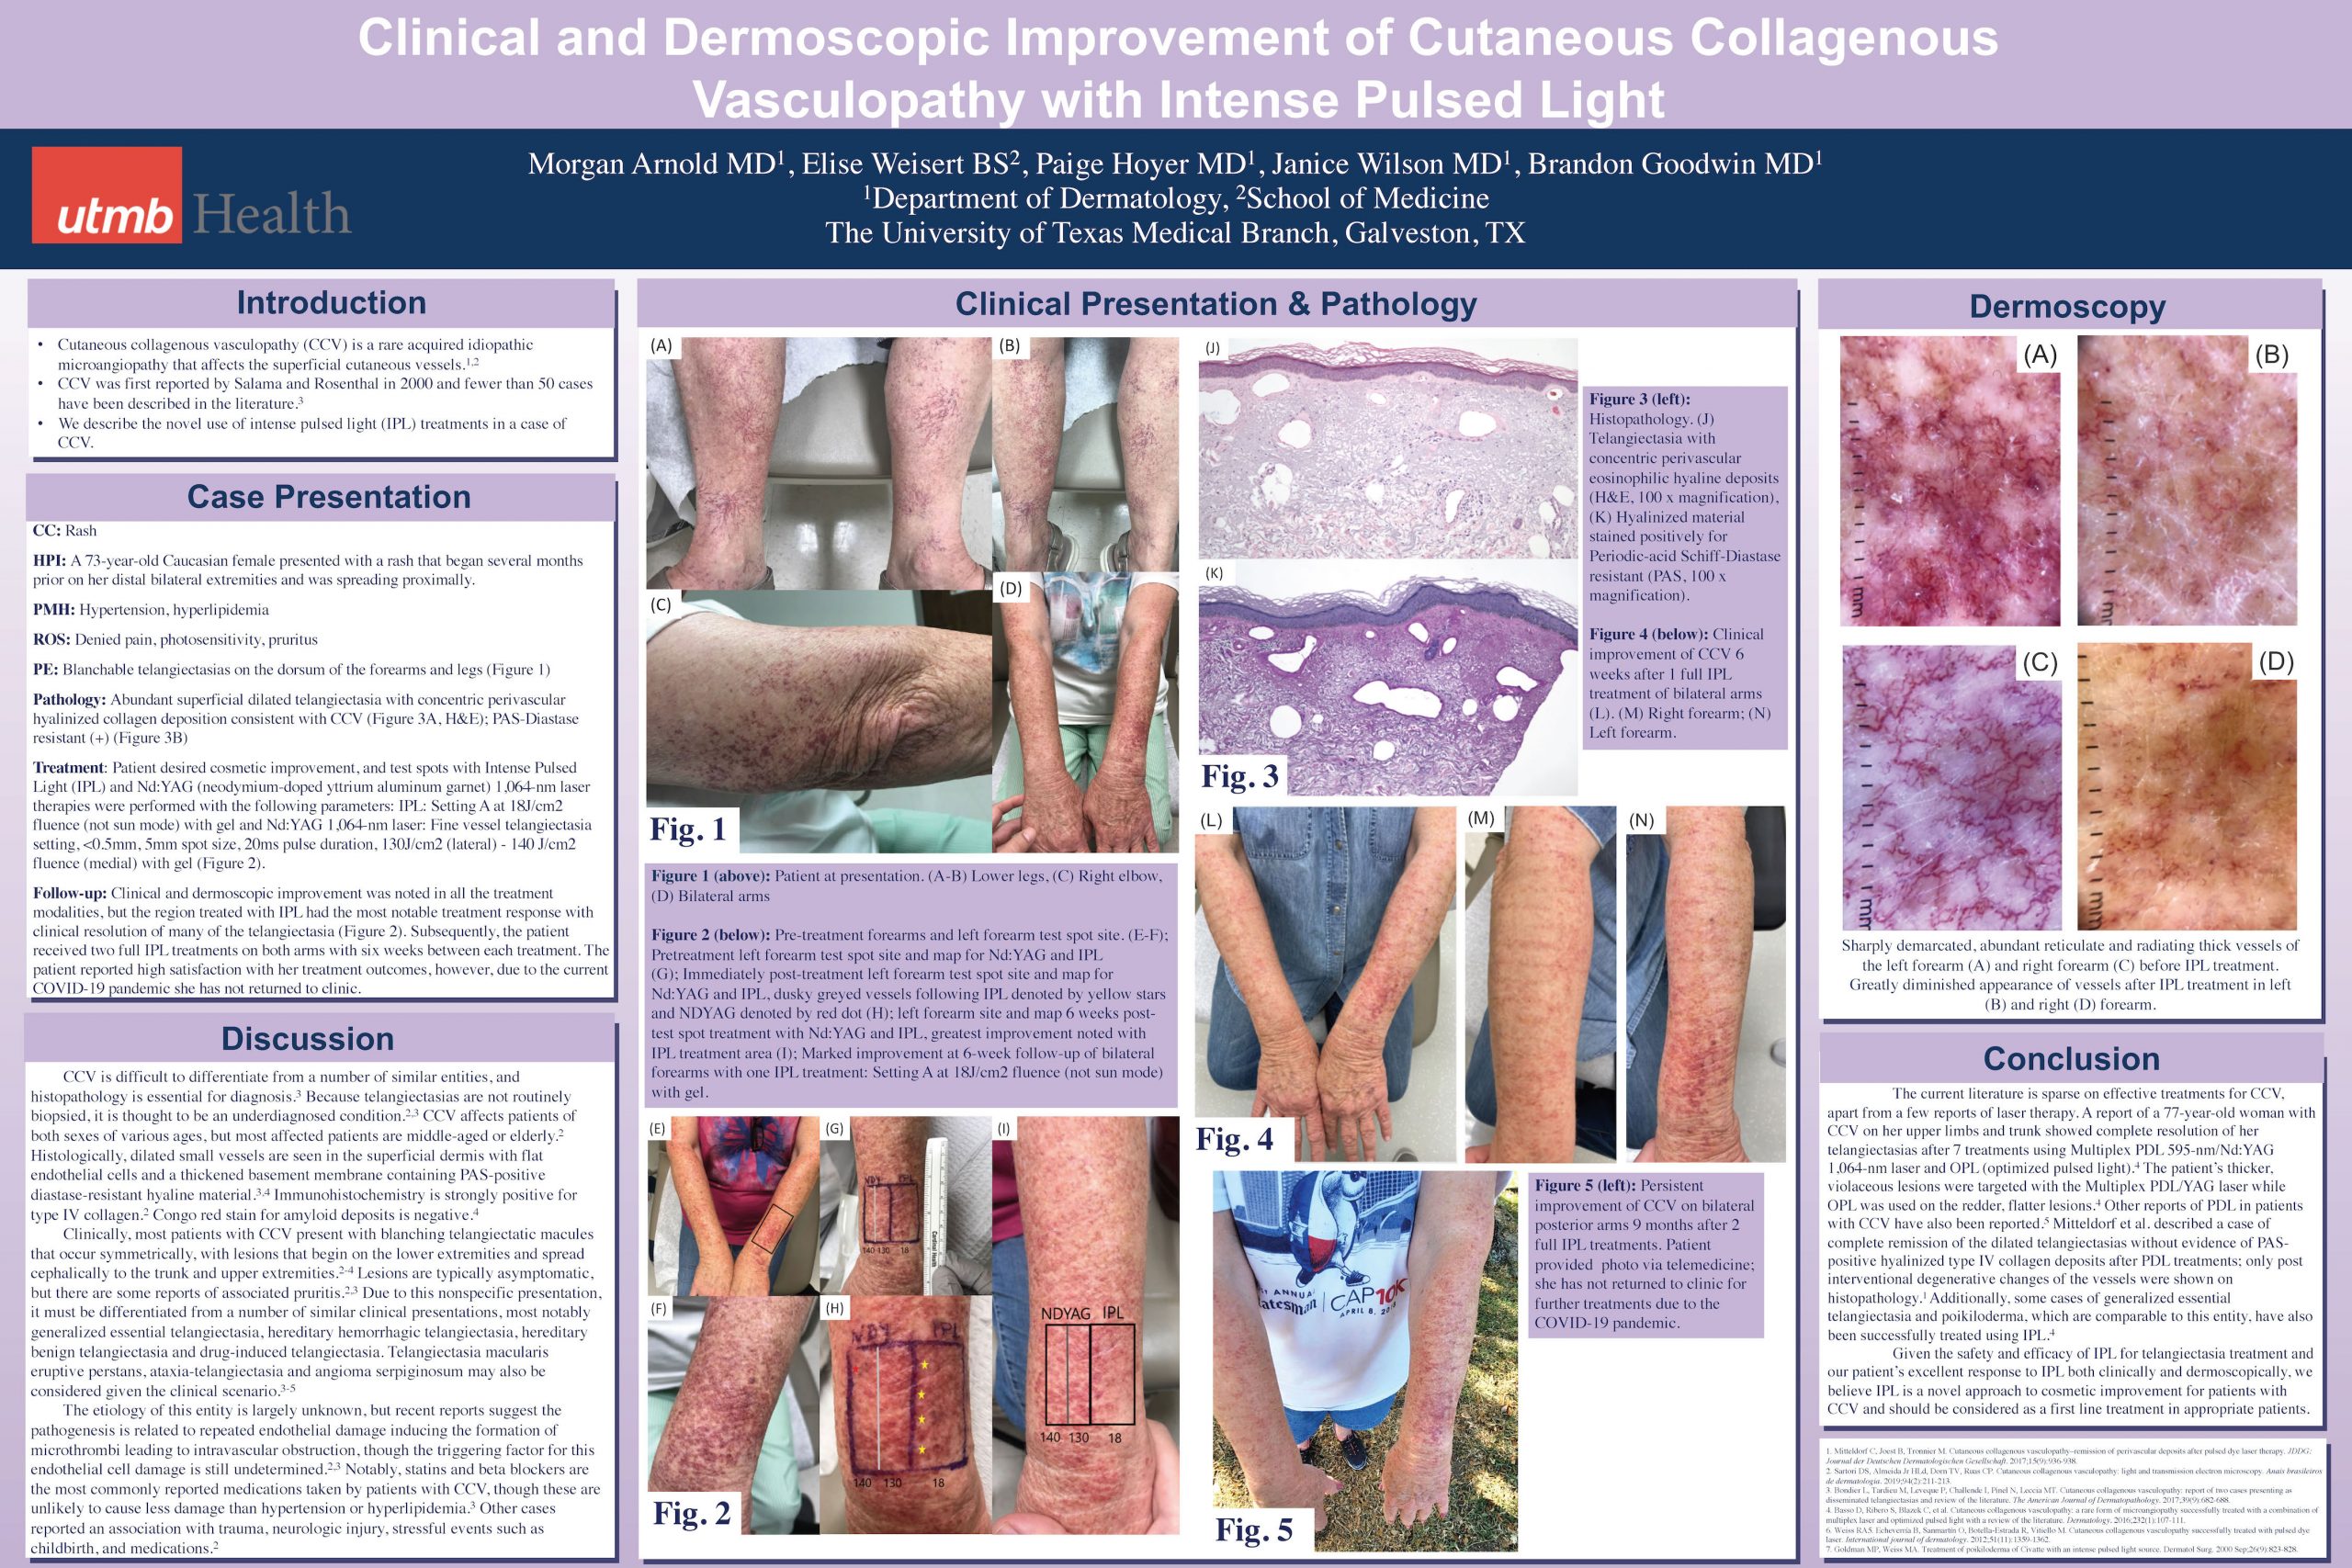 Clinical and Dermoscopic Improvements Poster